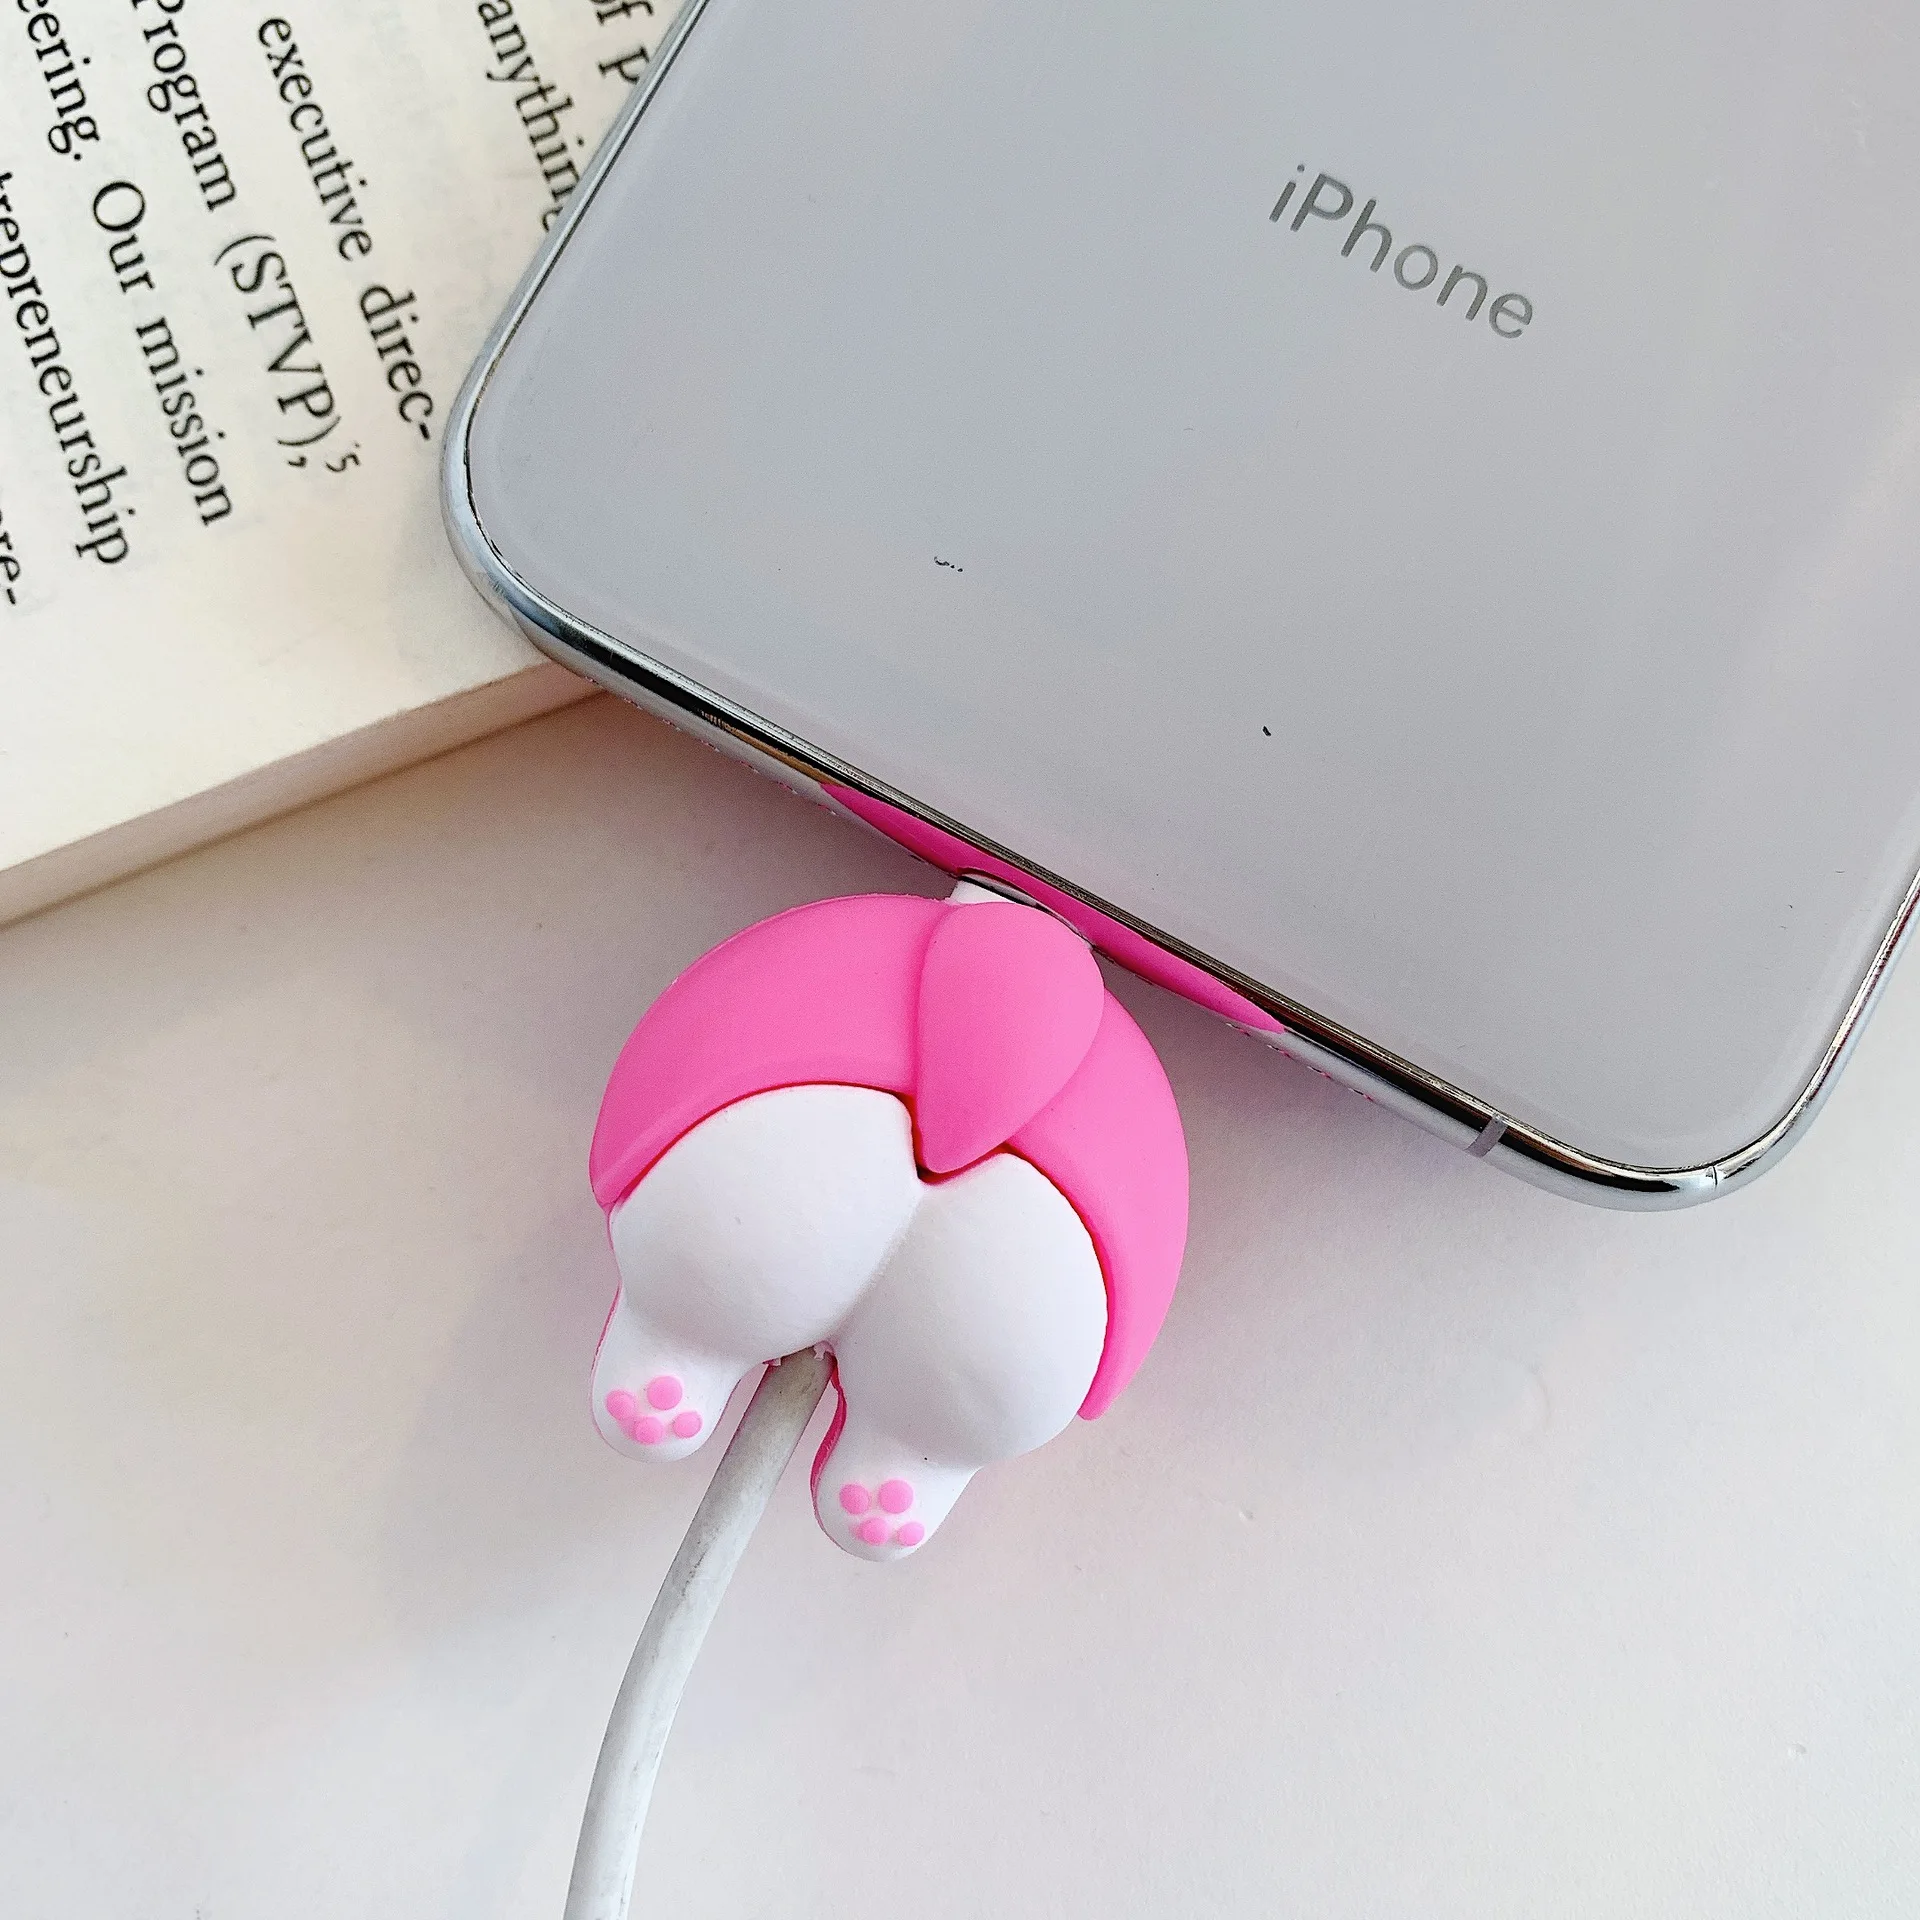 Cute Bear Charger Cable Protector Cable Cargador For Iphone 8 Cord Wire  Protector Saver Protection Cable Cover Osłonka Na Kabel - Cable Winder -  AliExpress